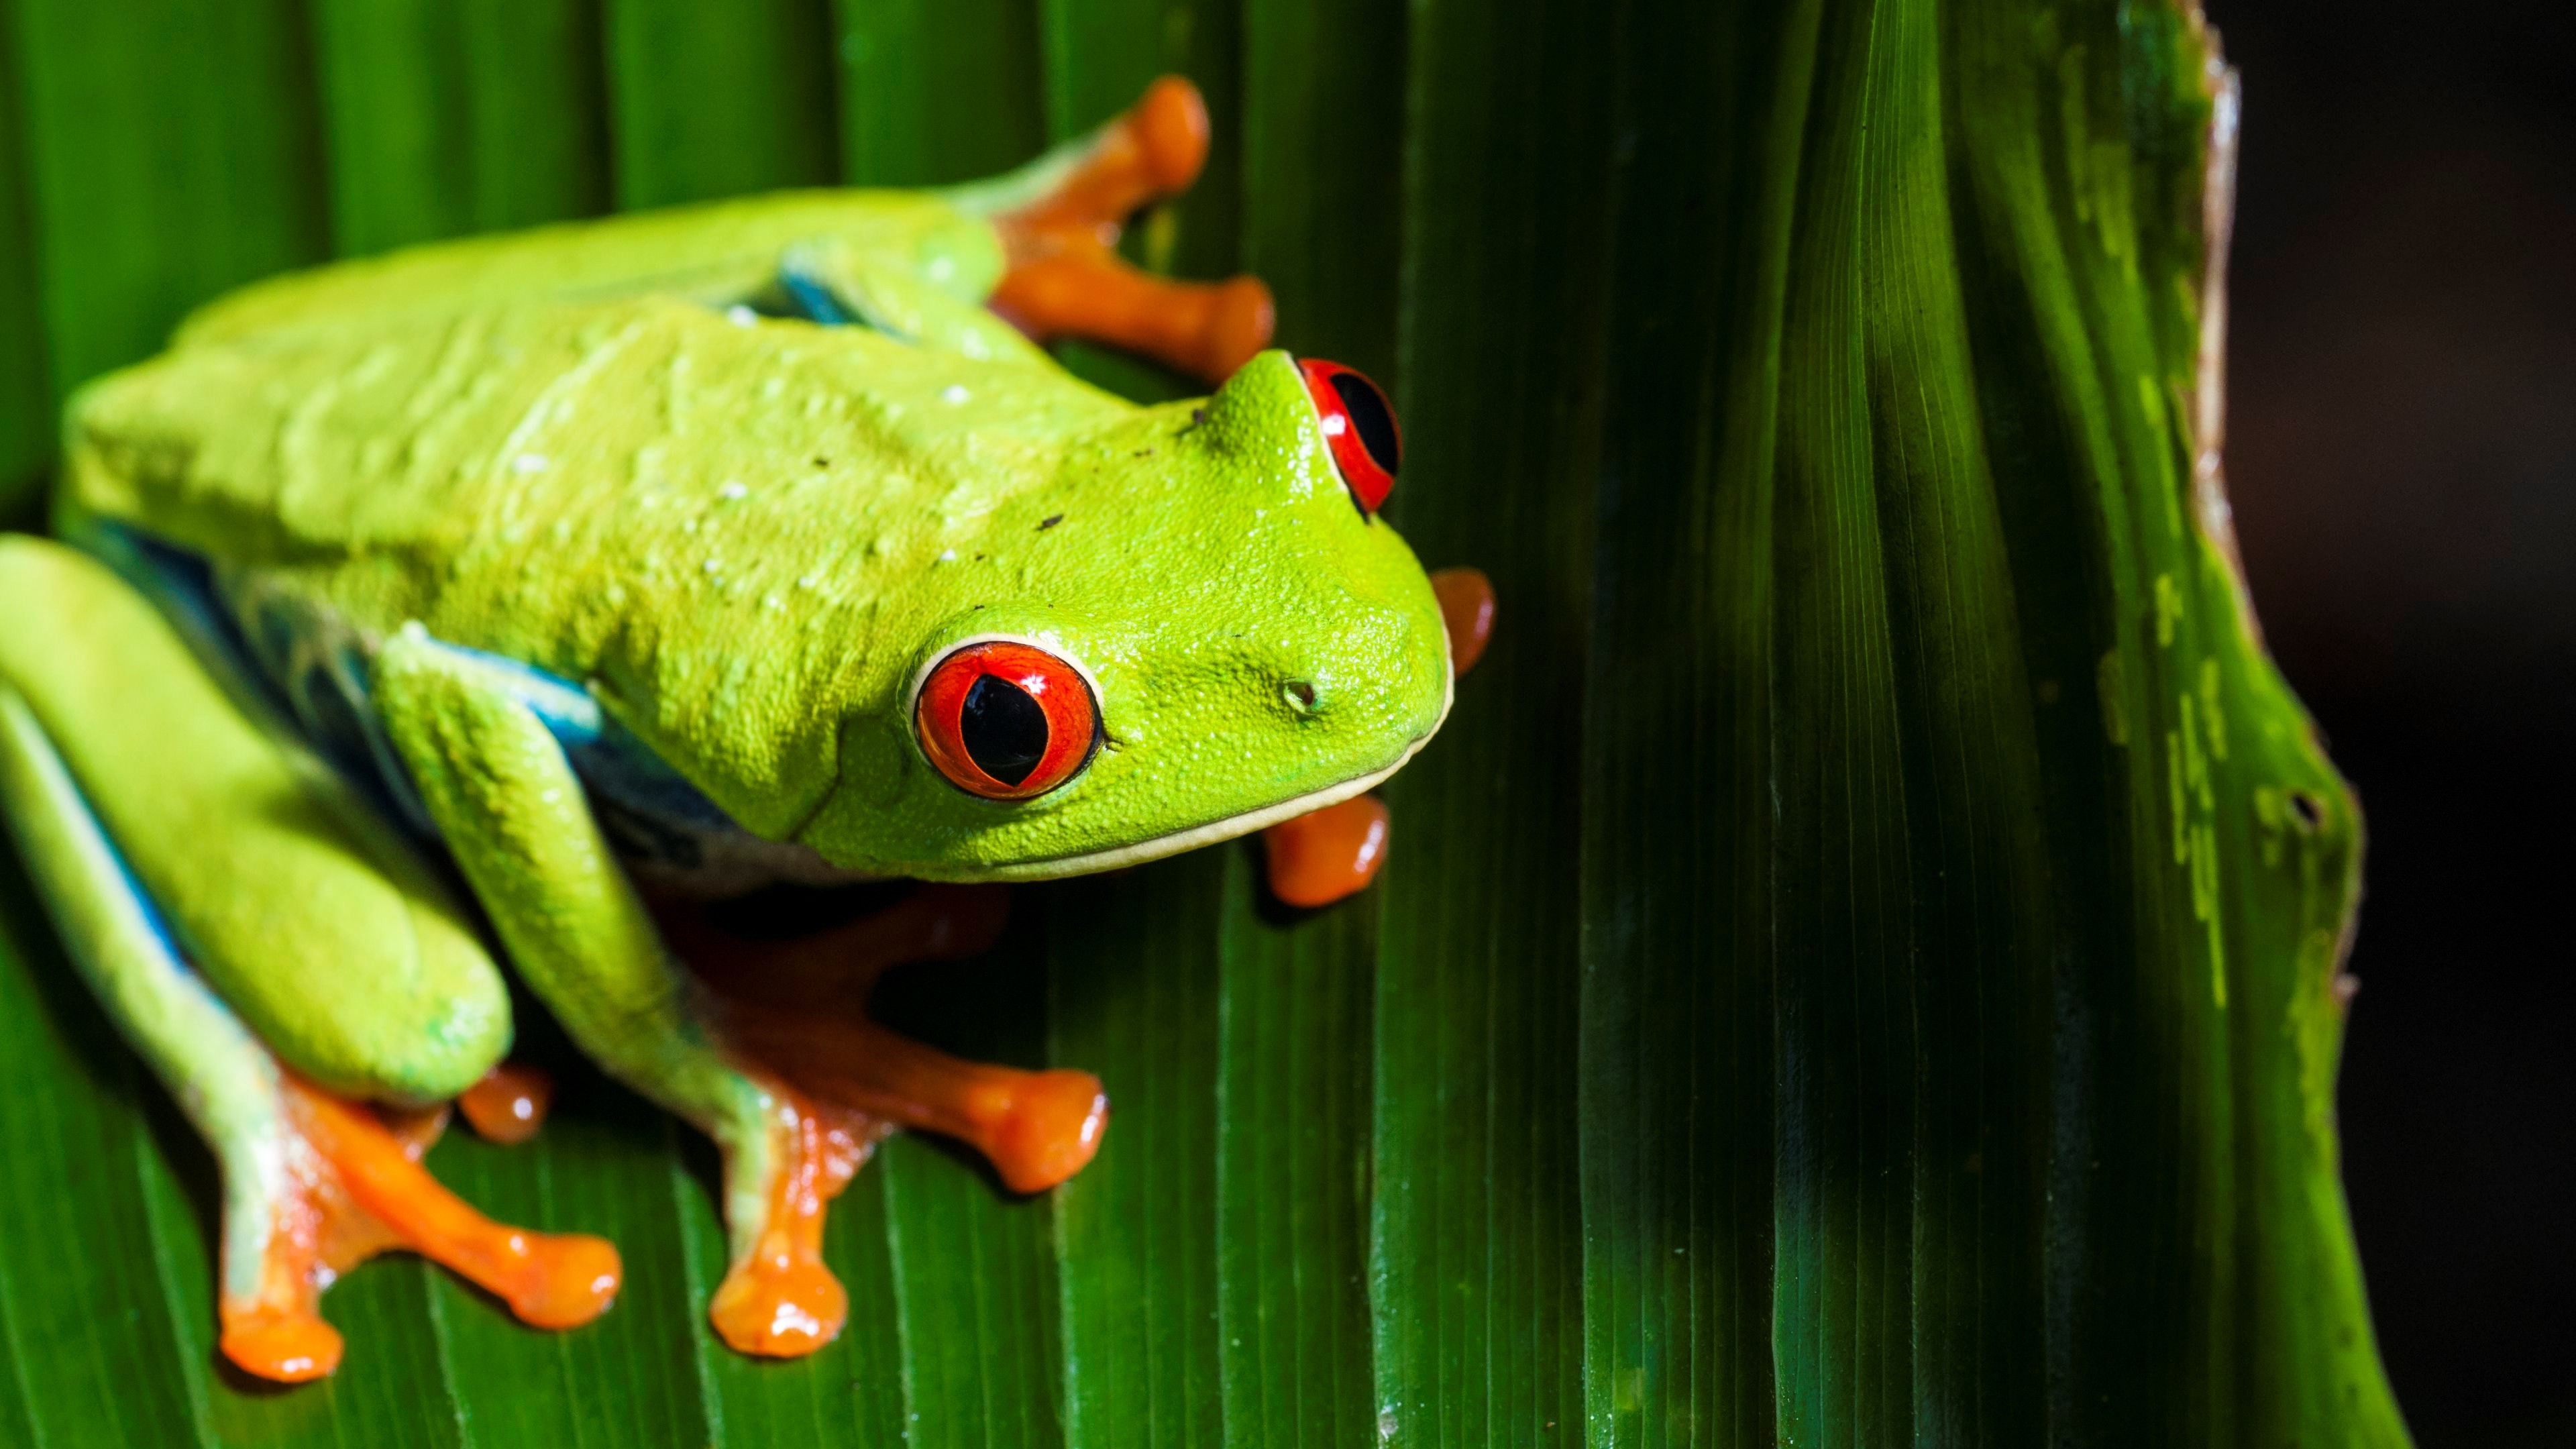 3840x2160 red eyed tree frog computer wallpaper backgrounds, 958 kB - Goldwin  Nash-Williams